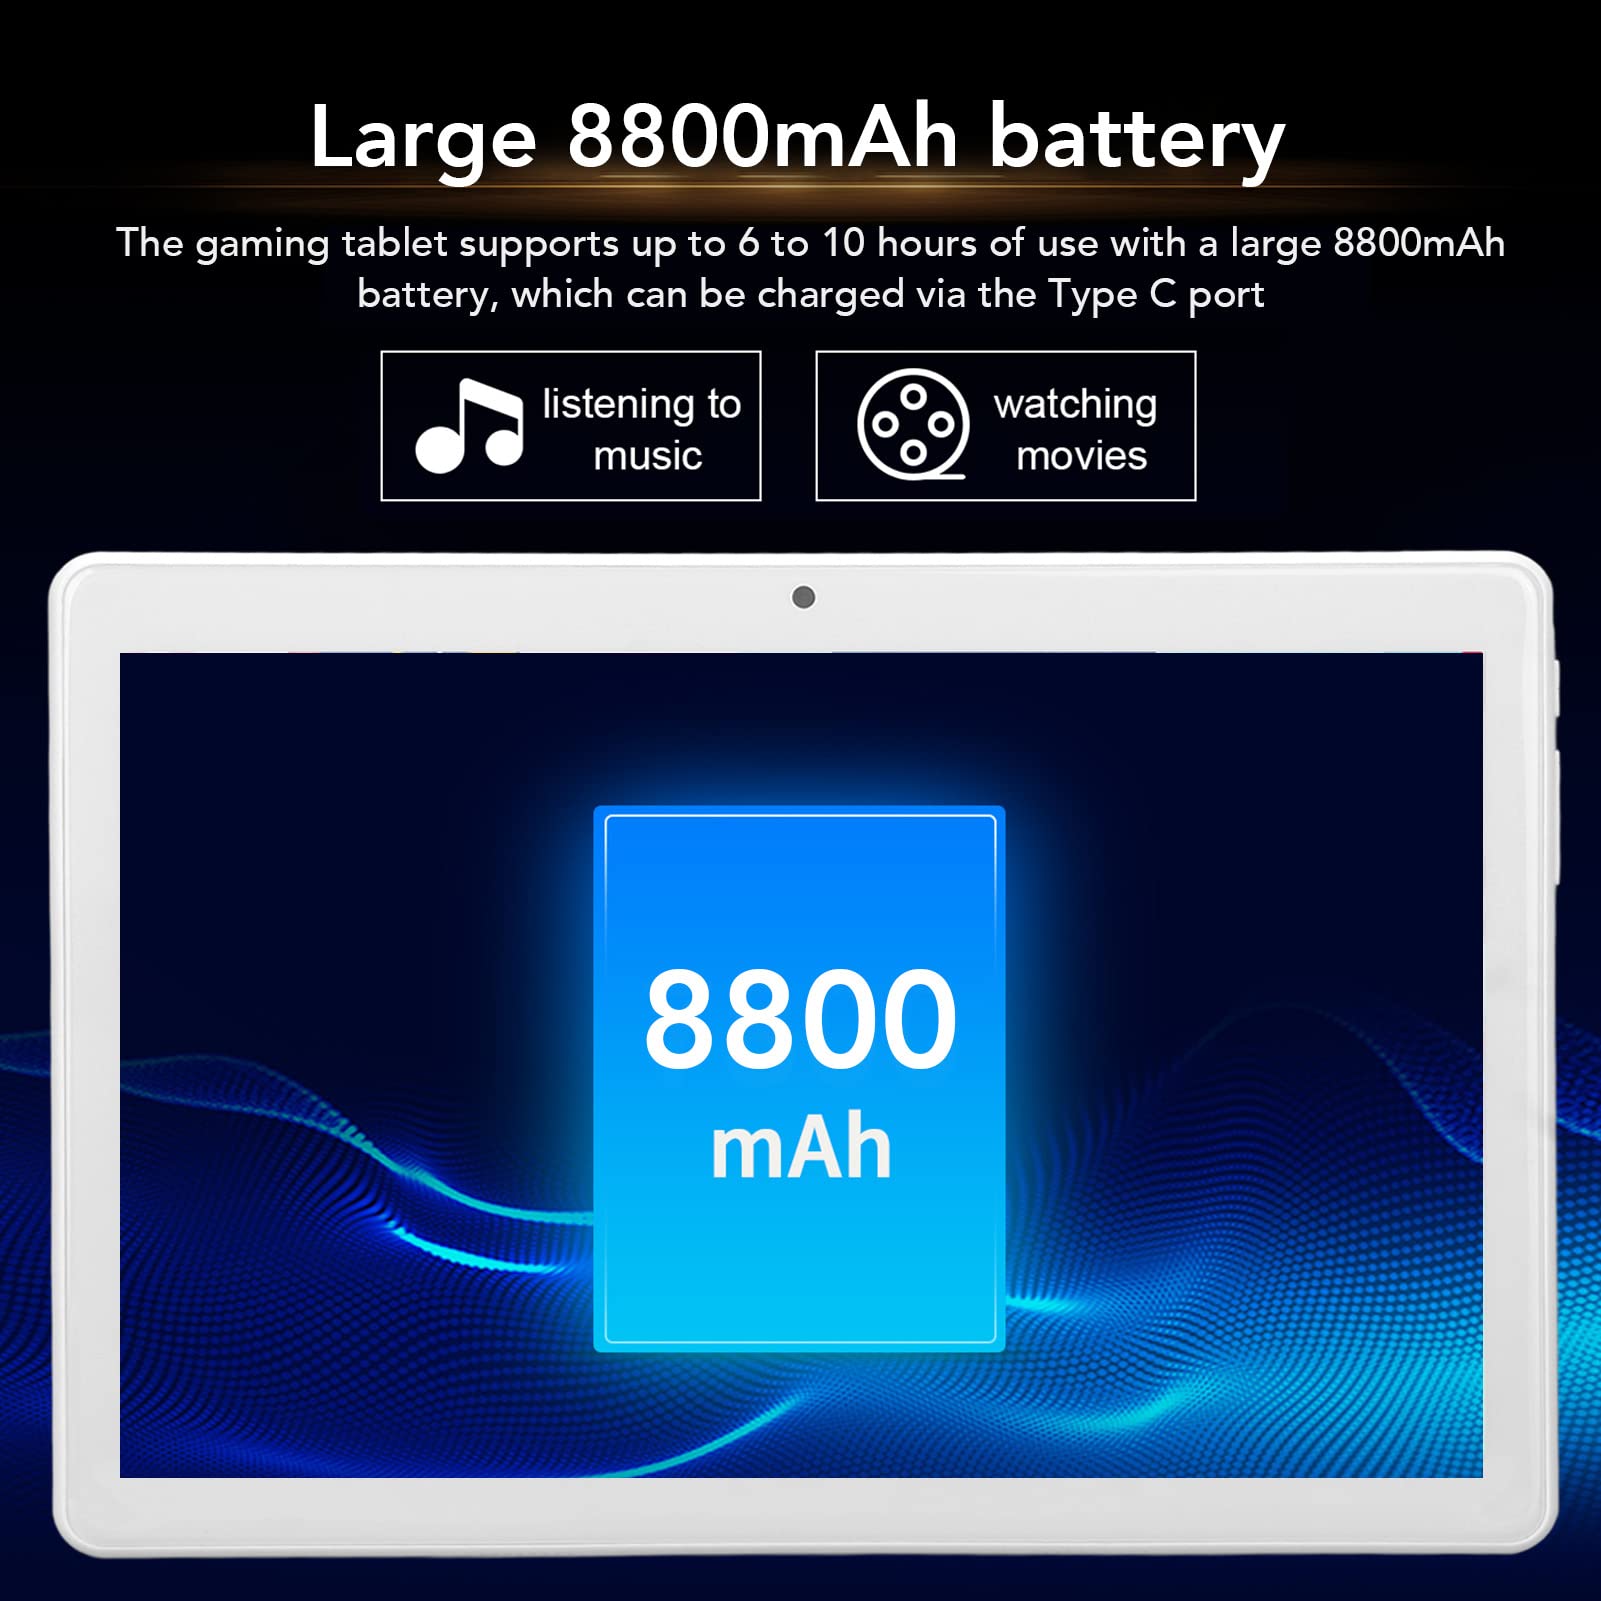 10.1 Inch Tablets, HD Tablet, 2.4G 5G Dual Band WiFi Supported, 10 Core Processor, 8800mAh Lasting Battery Big IPS Screen 6GB 128GB High Performance